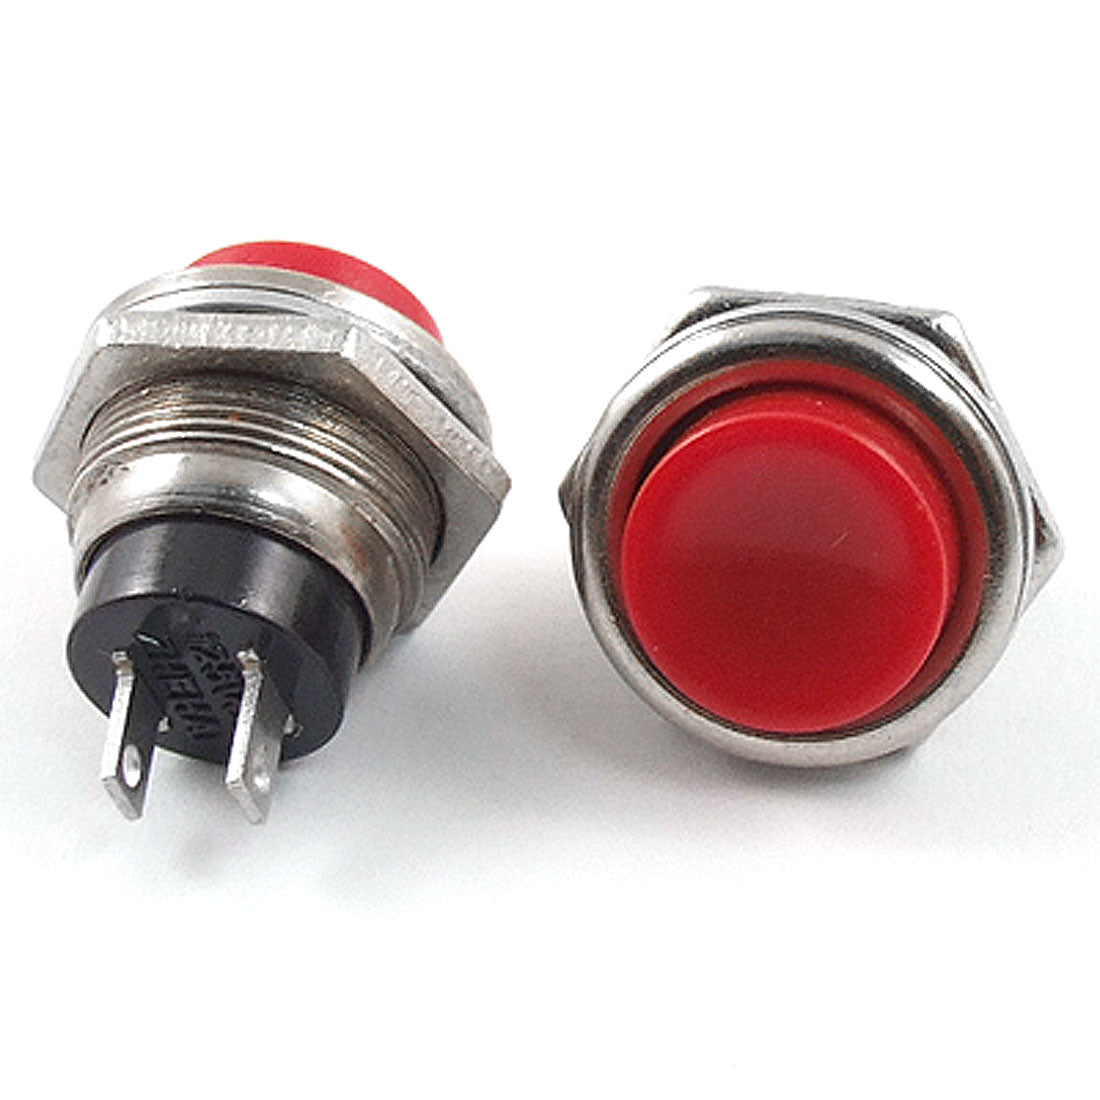 uxcell Uxcell 3 Pcs 16mm SPST Momentary ON/OFF Push Button Switch Red AC 125V 3A